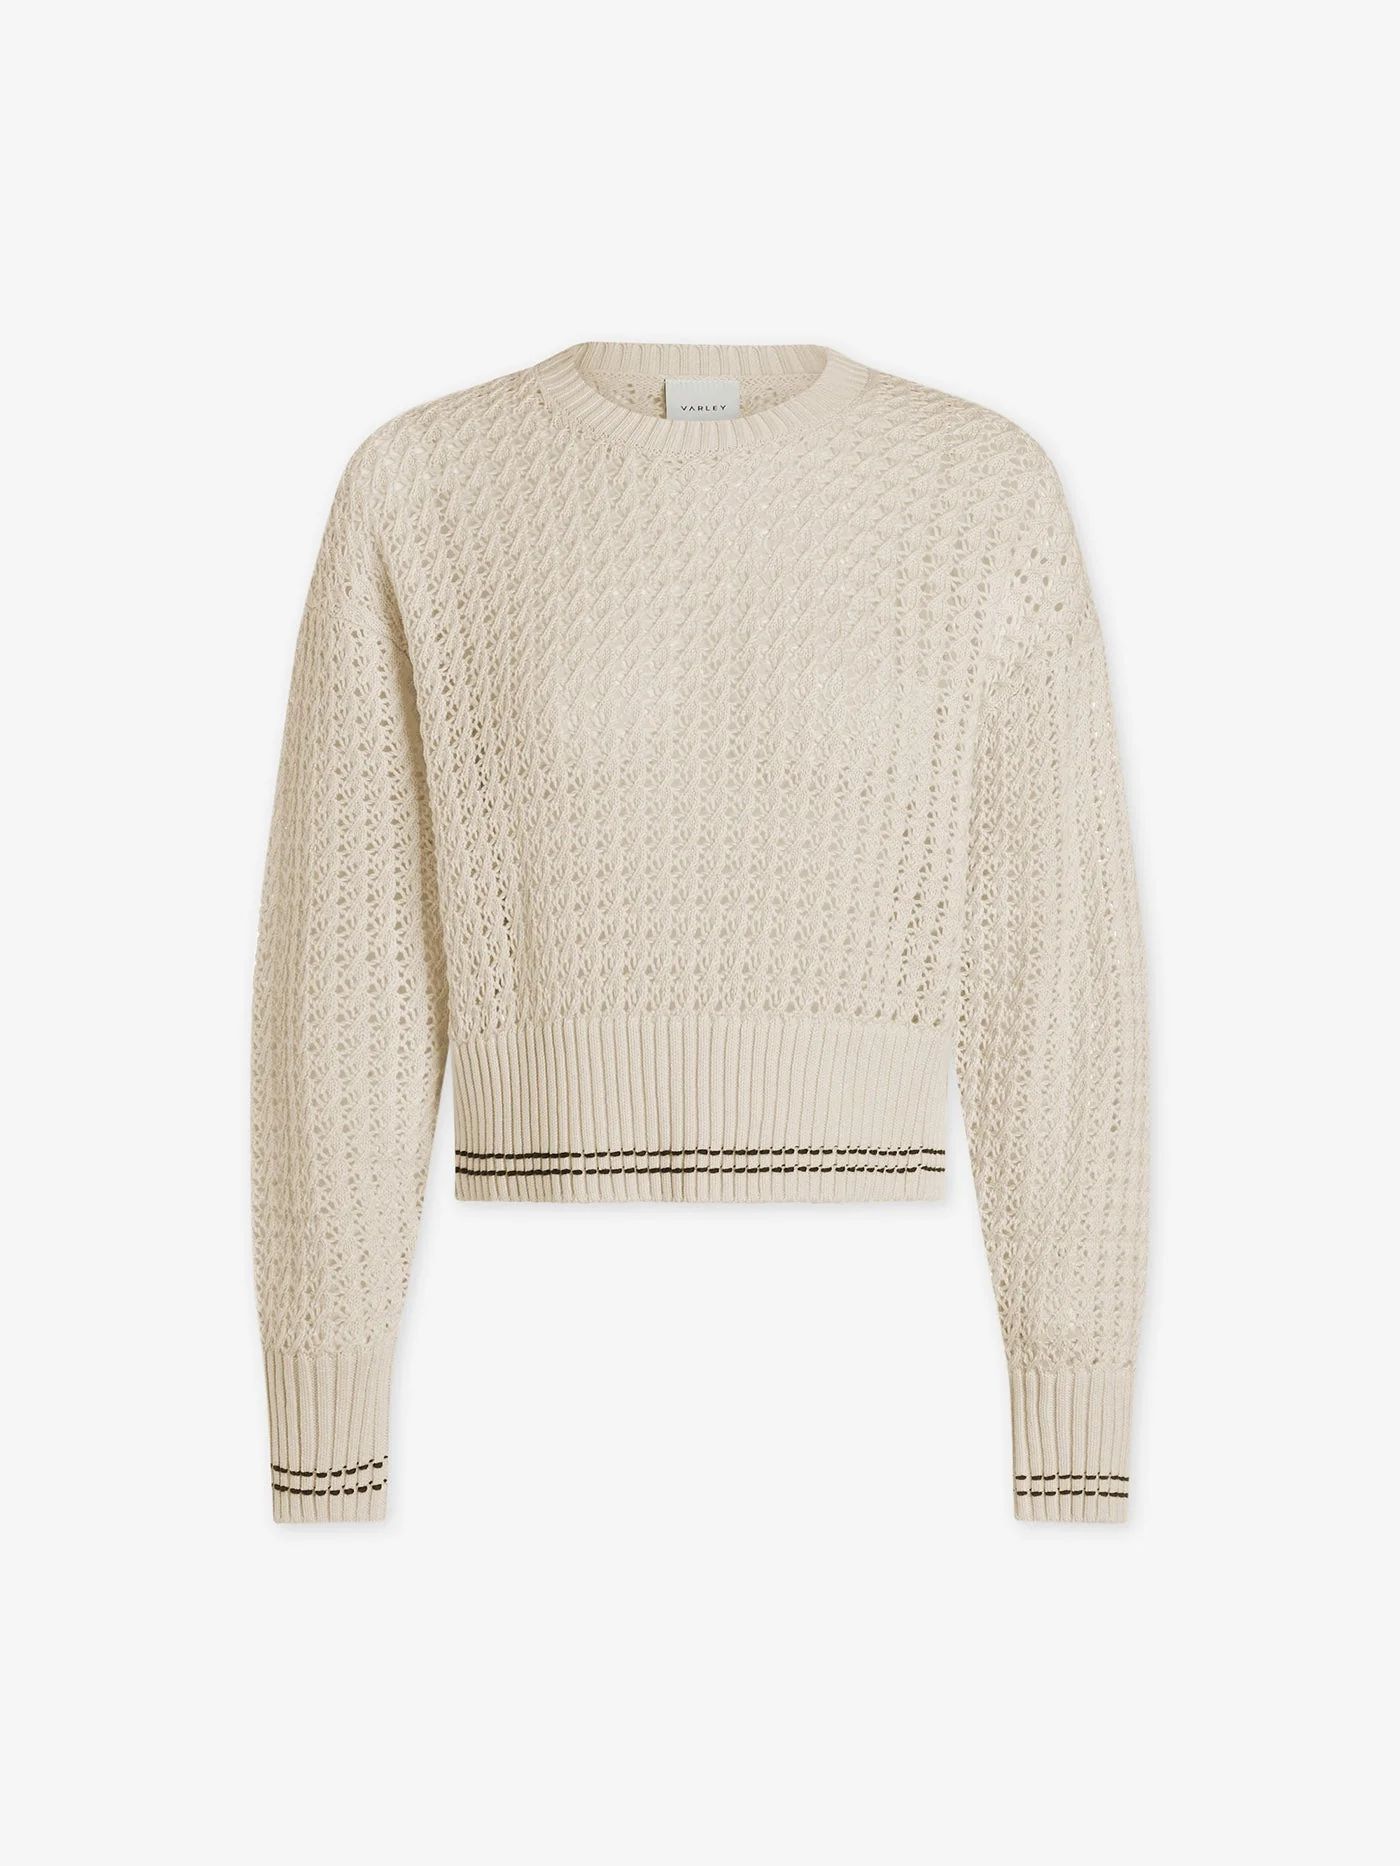 Azores Sweater | Varley USA